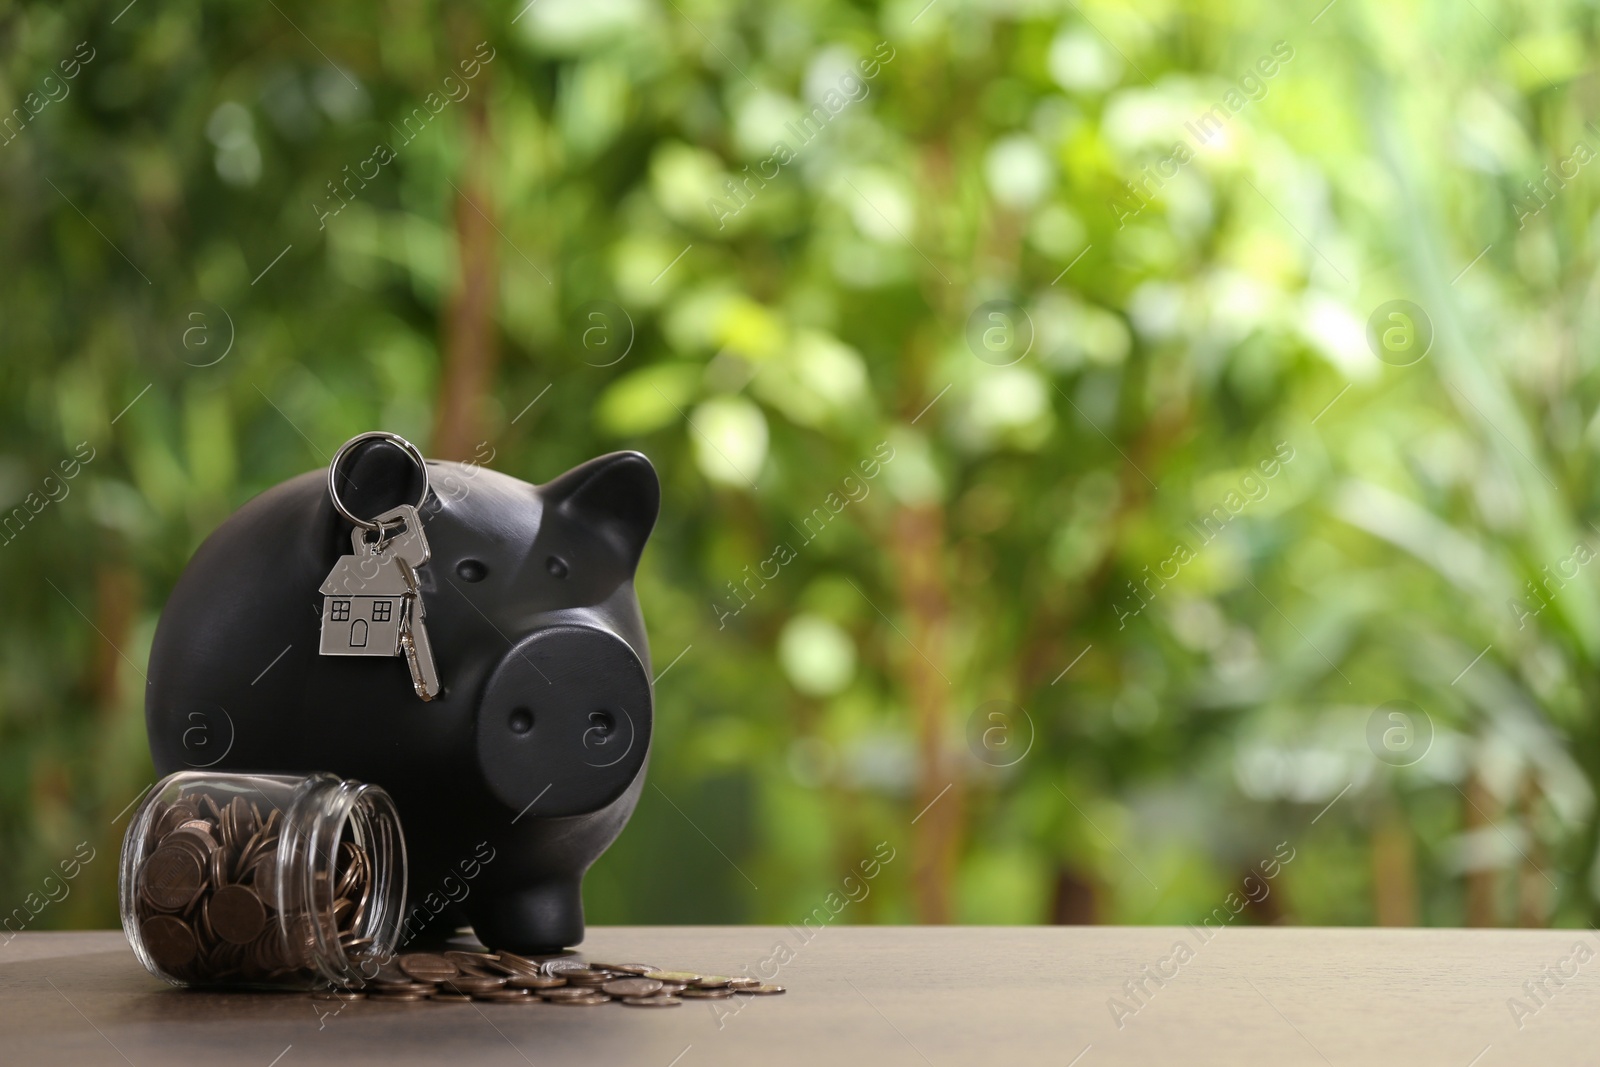 Photo of Piggy bank with key and coins in glass jar on wooden table outdoors, space for text. Saving money concept